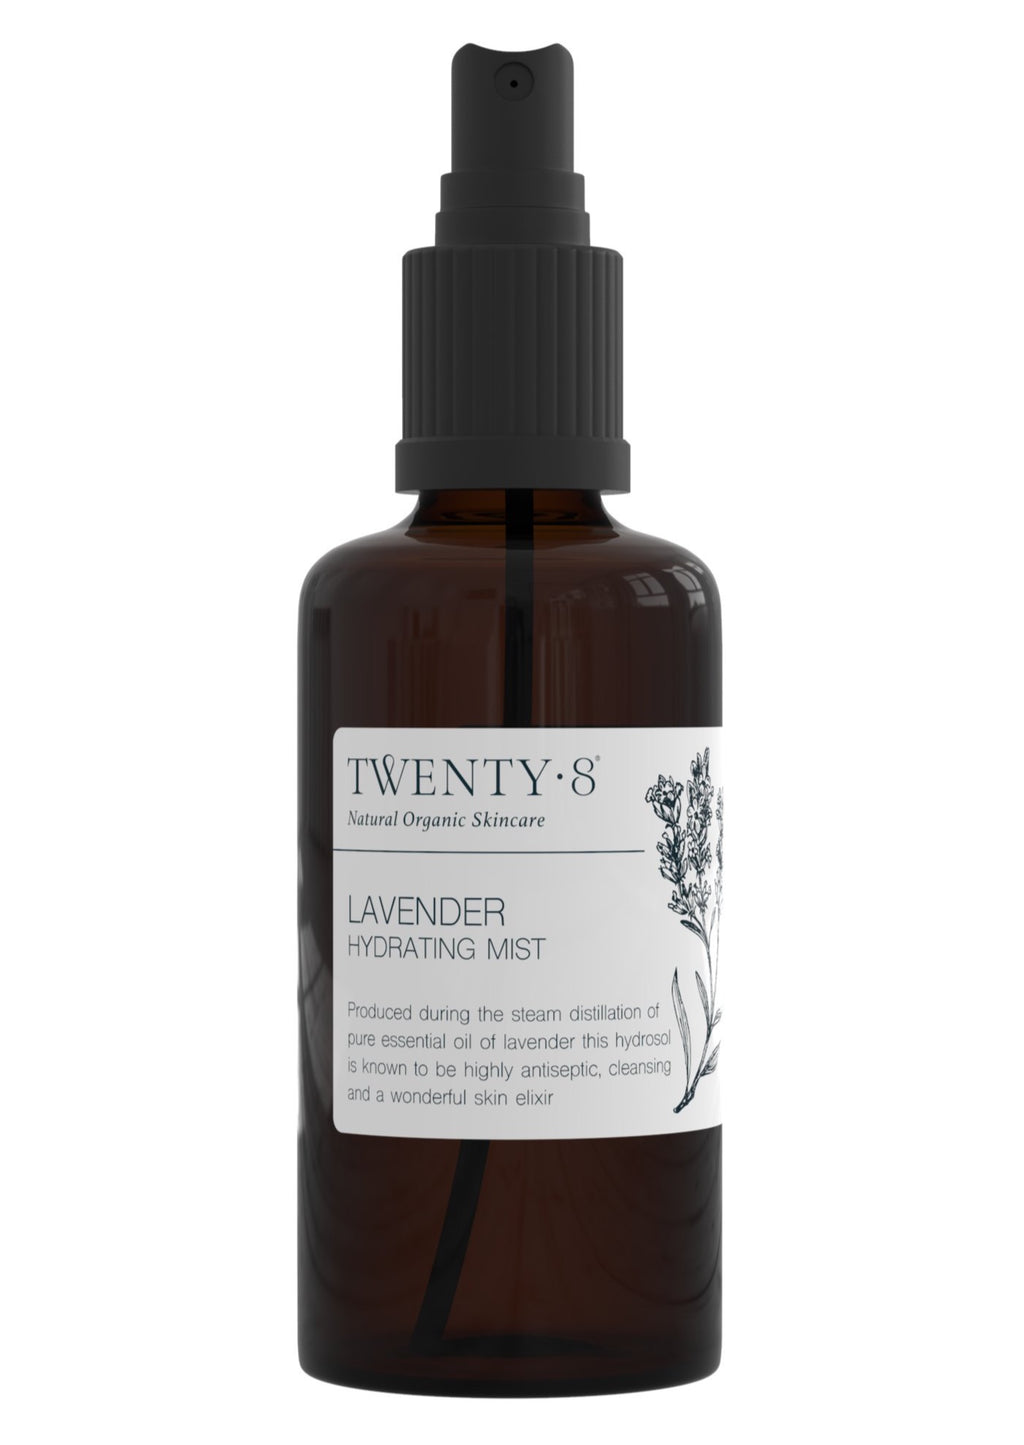 100% Organic Lavender Hydrosol  The Lavender Hydrating mist has many unique constituents that can support conditions like anxiety, stress, insomnia, nappy rash, sunburn and is especially helpful for irritated and damaged skin.  We also love it as our daily toner after cleansing, or to hydrate the skin during the day.